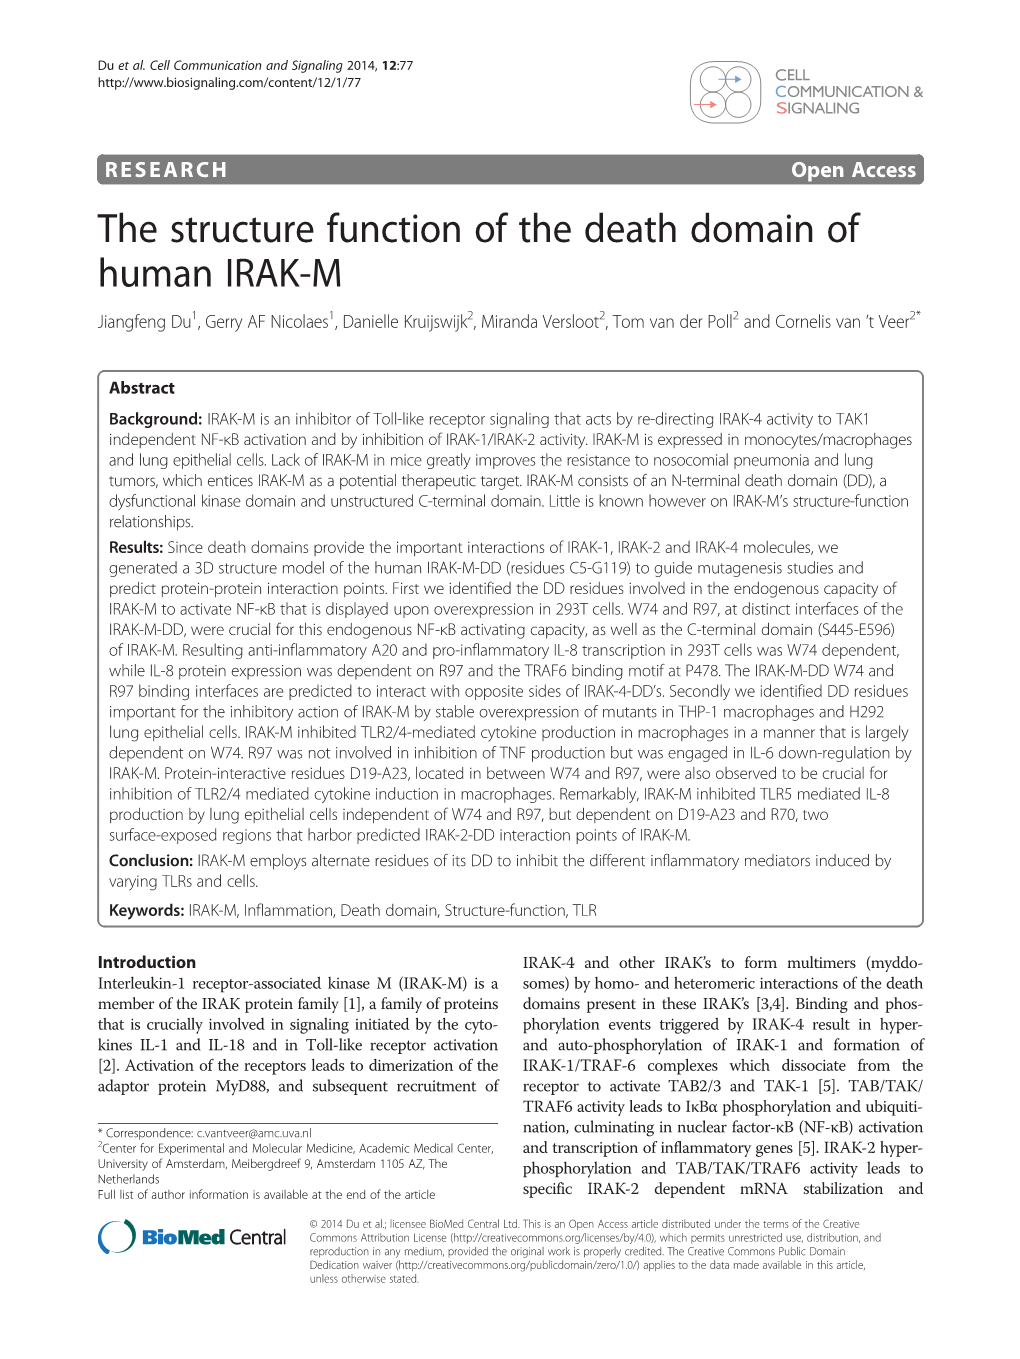 The Structure Function of the Death Domain of Human IRAK-M